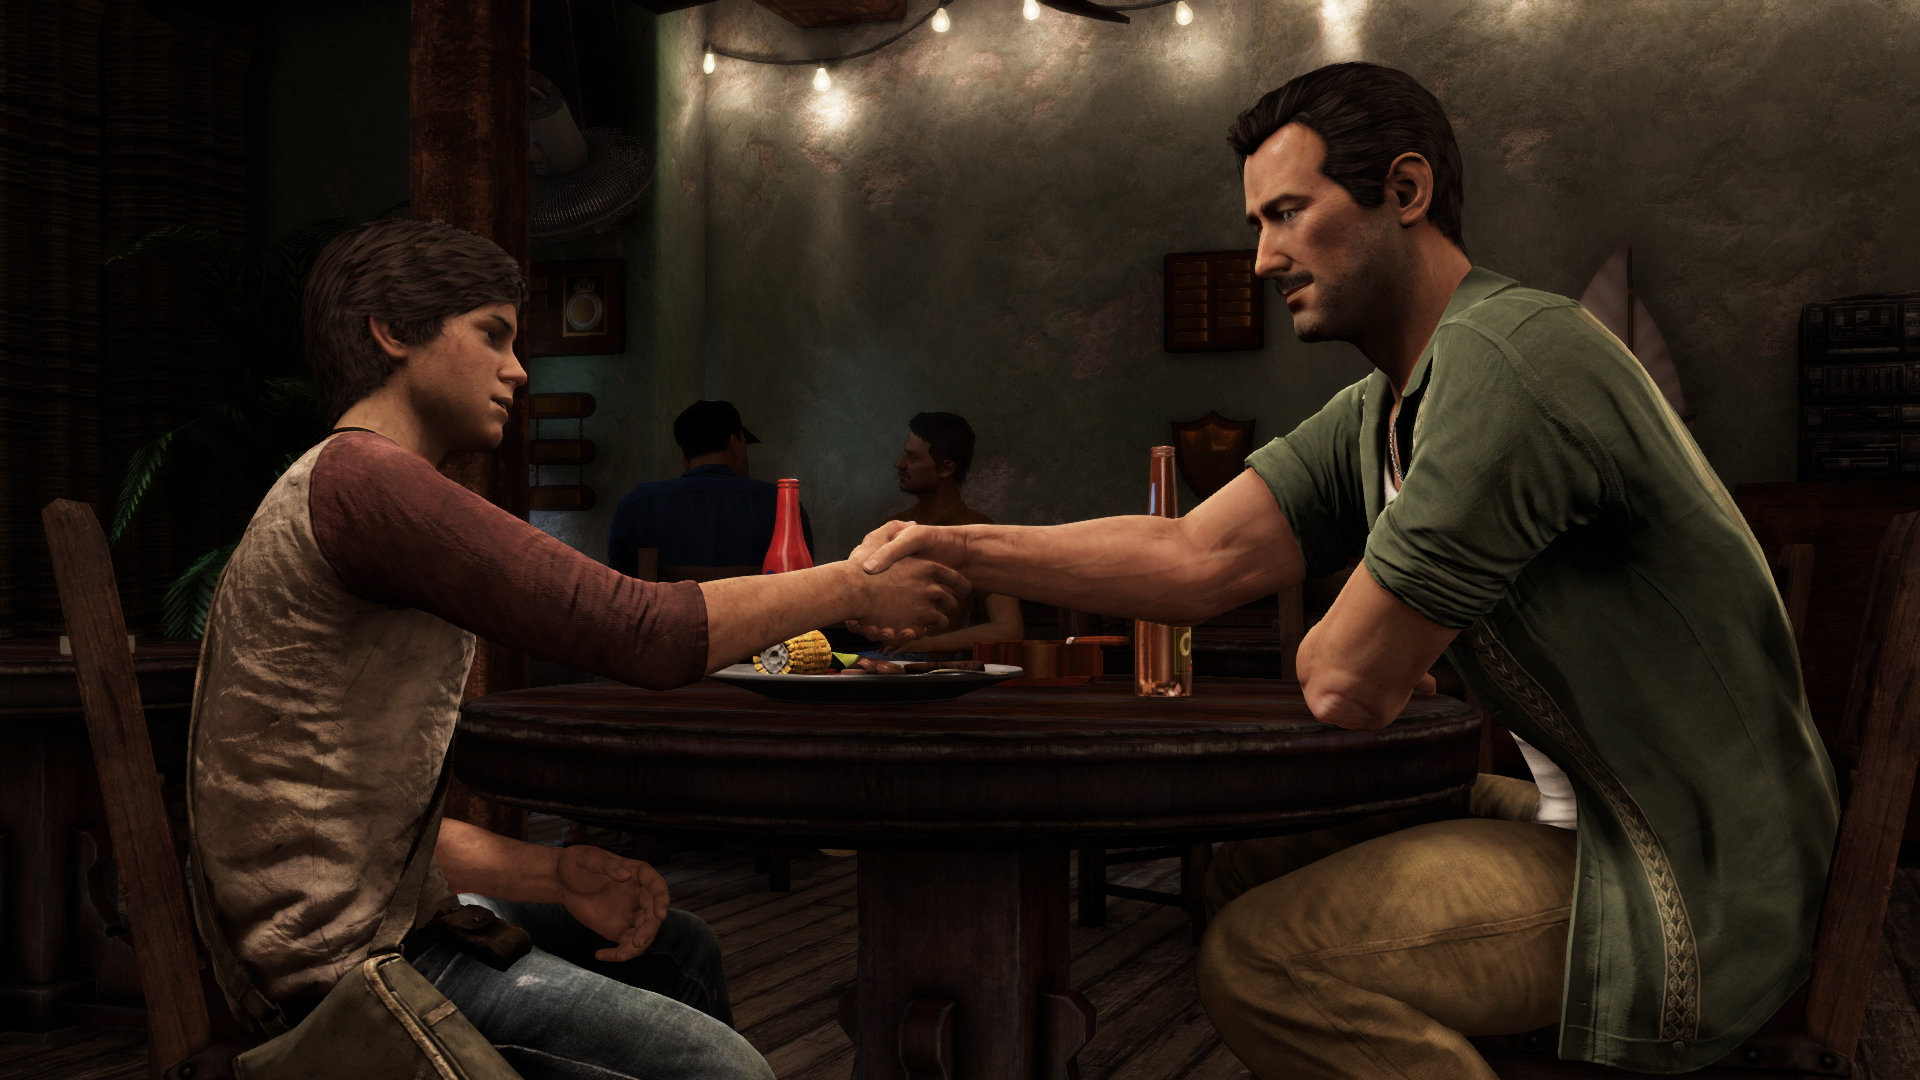 uncharted-the-nathan-drake-collection-screen-35-ps4-us-07oct15.jpg